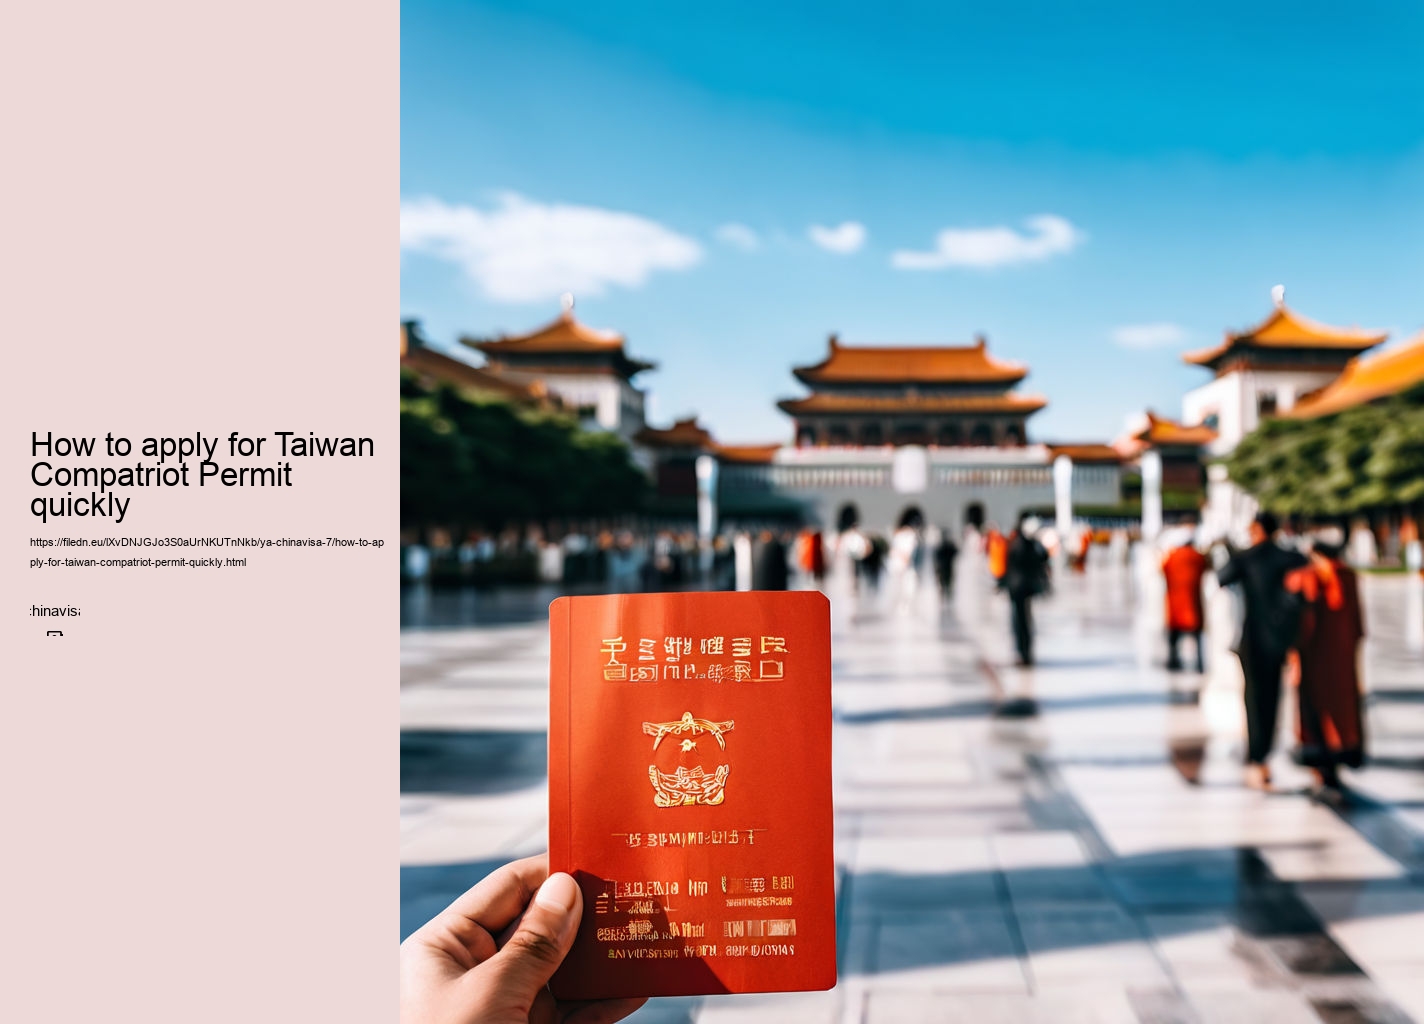 How to apply for Taiwan Compatriot Permit quickly